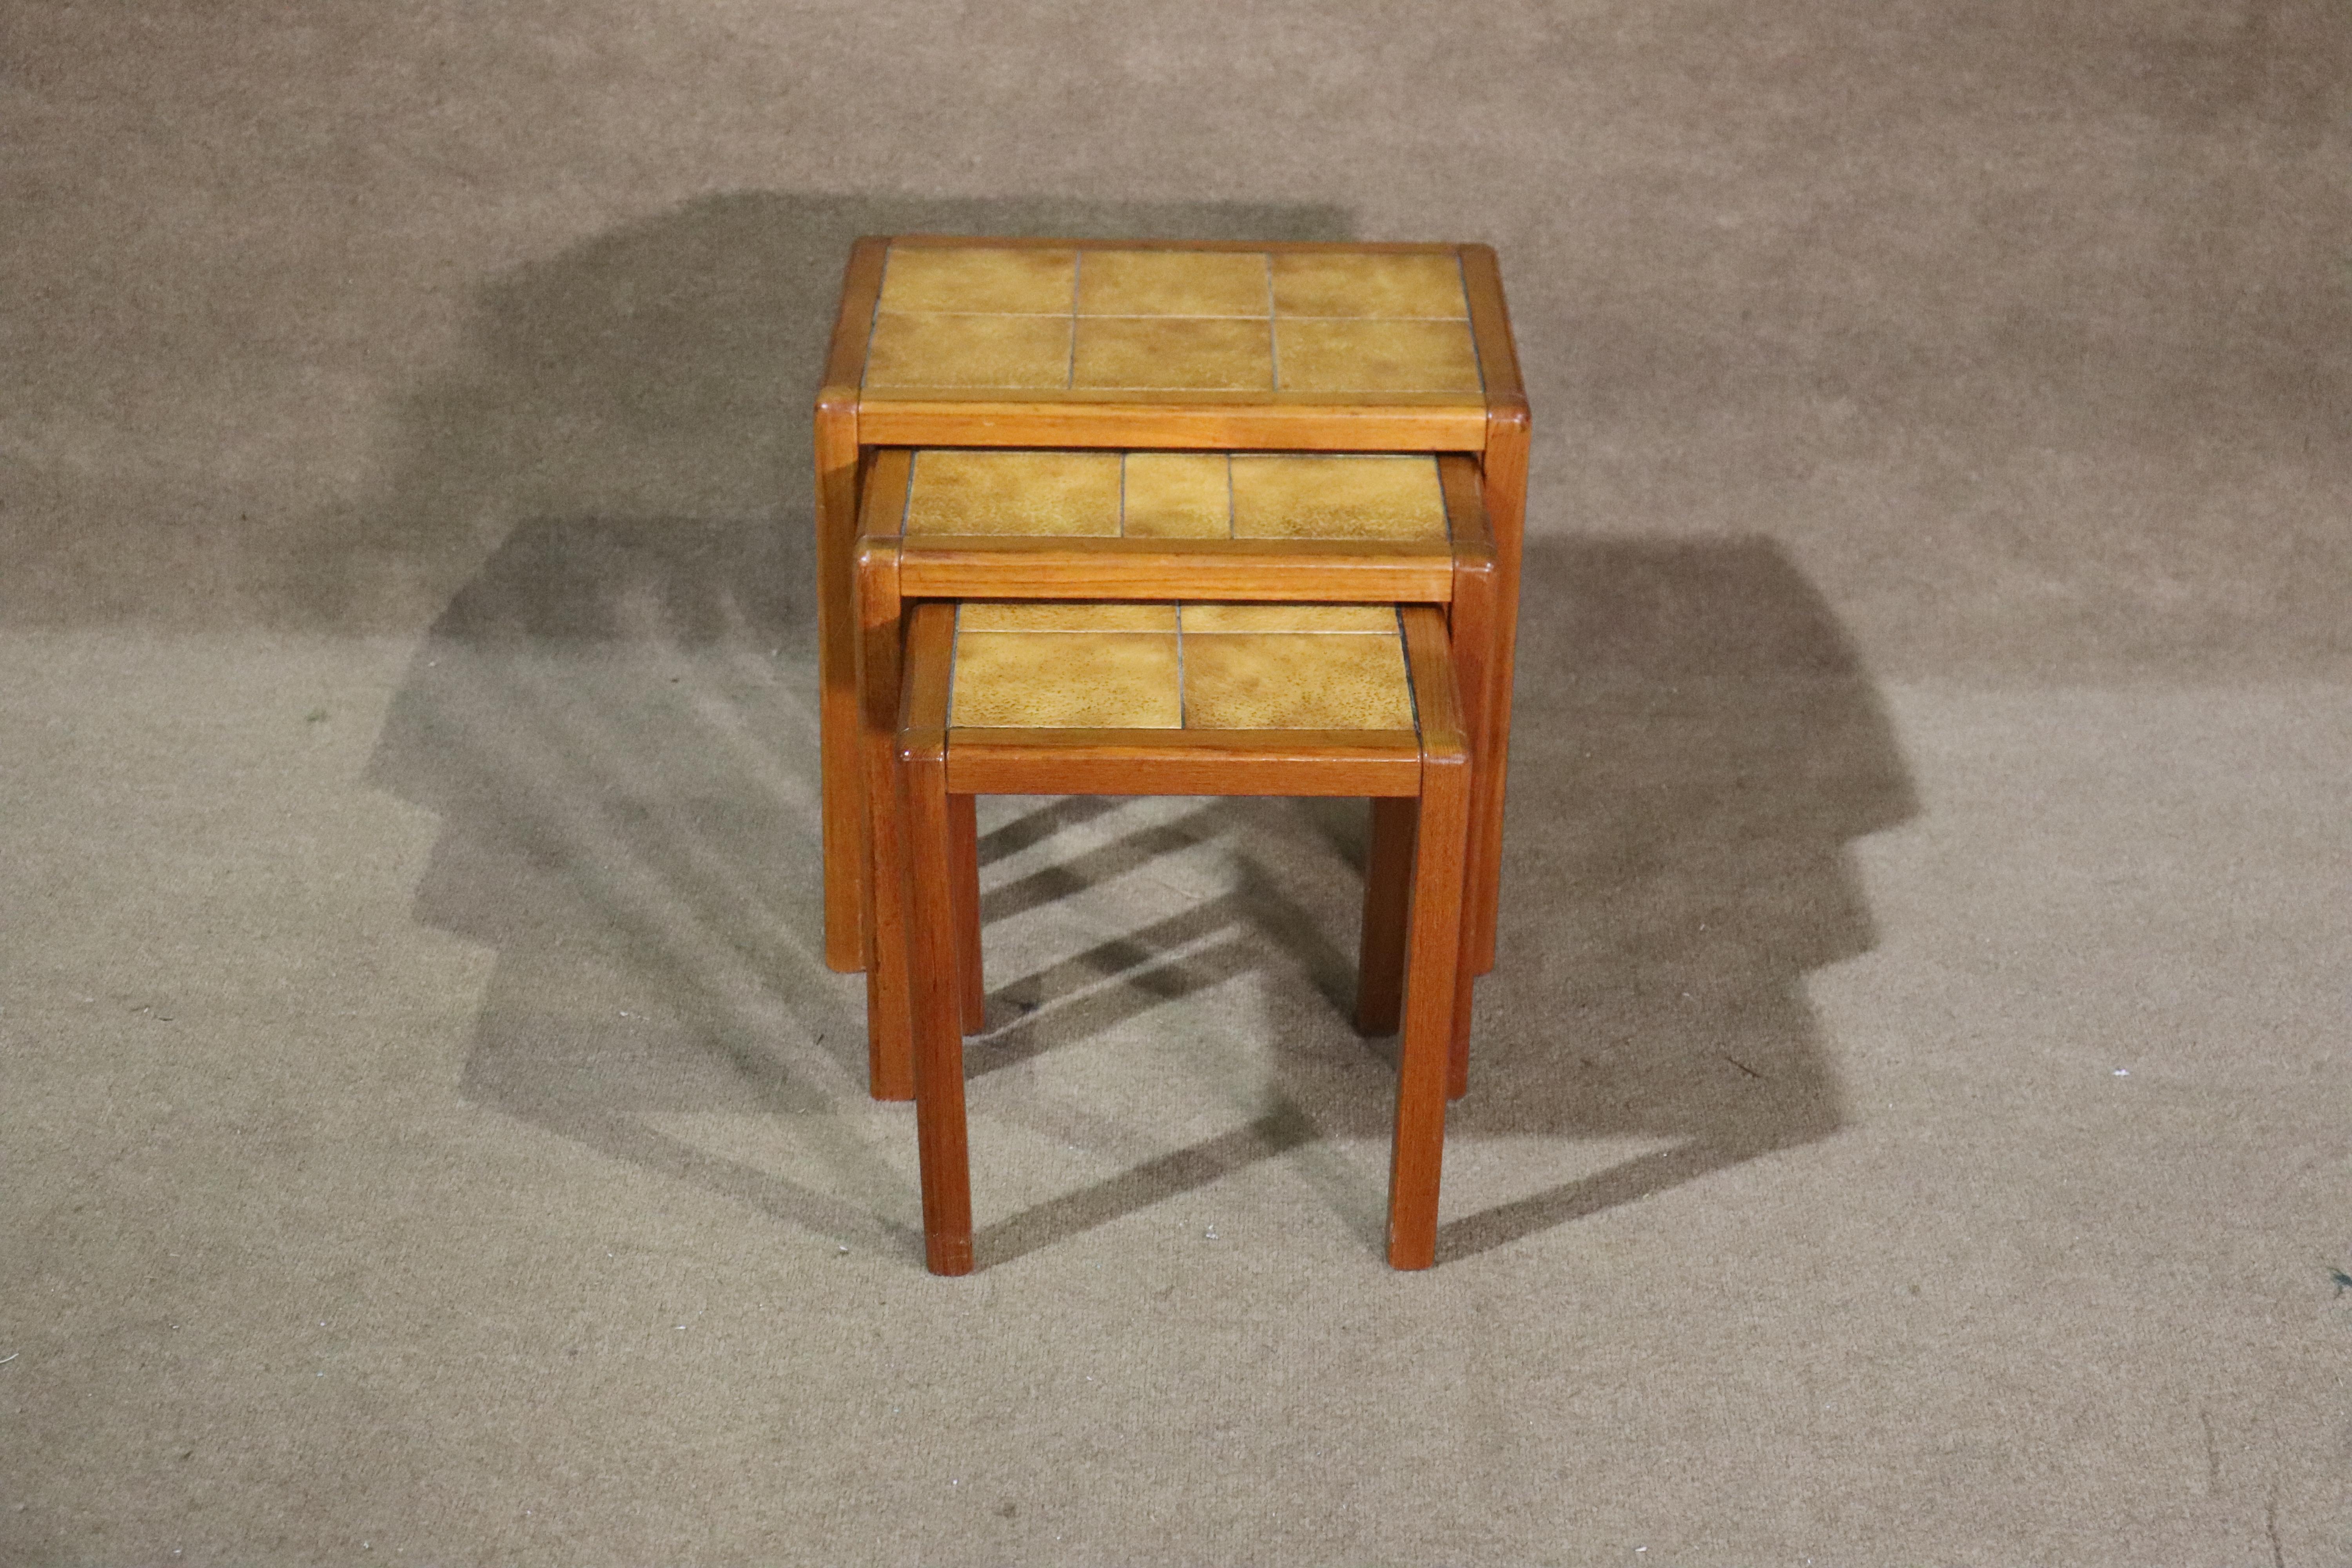 Set of vintage nesting tables made of teak wood and ceramic tiles. Great for entertaining, and easy to stow away.
Please confirm location NY or NJ